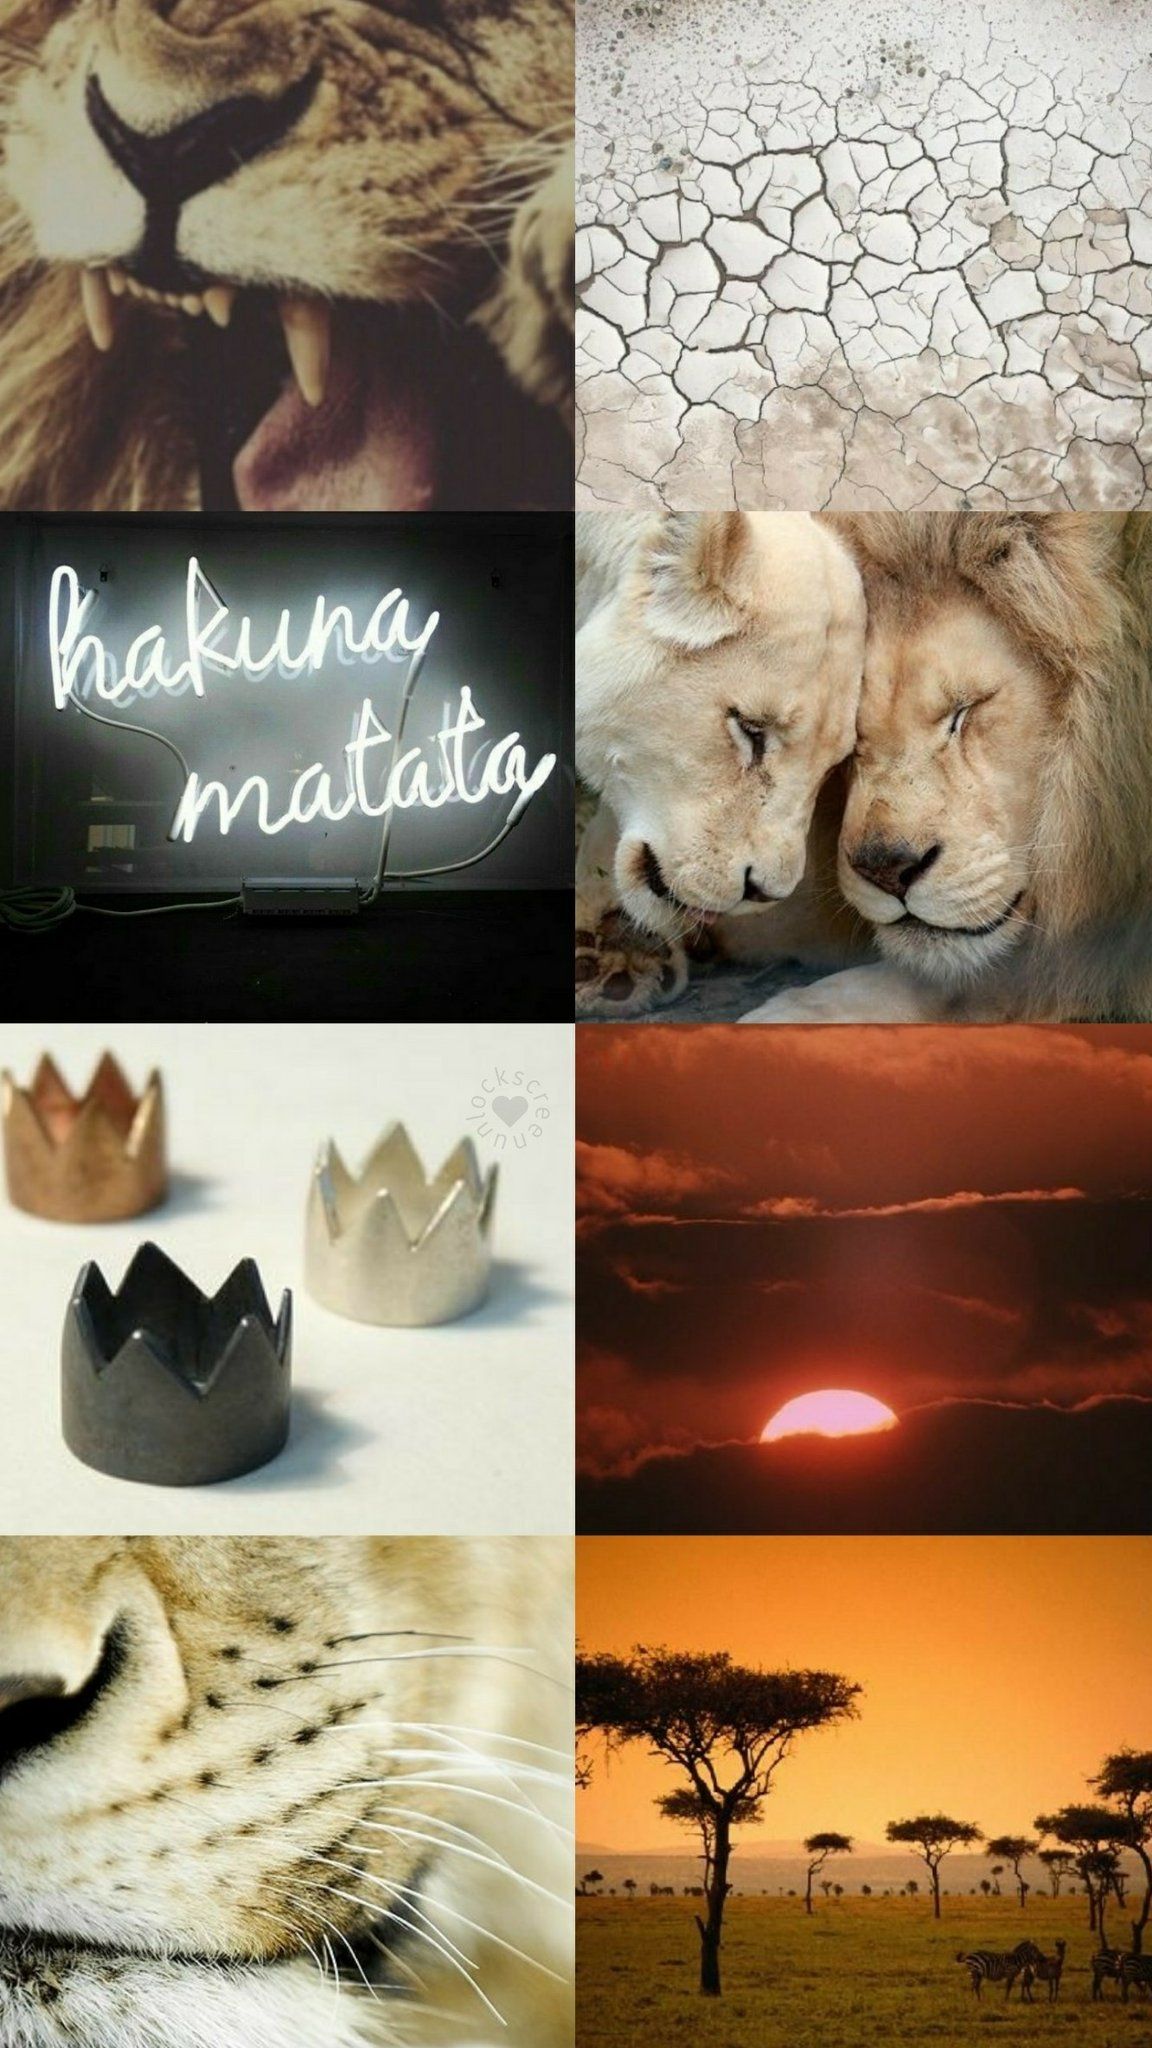 Collage of images related to the Lion King including the title of the movie, a sunset, a lion and a cheetah. - The Lion King